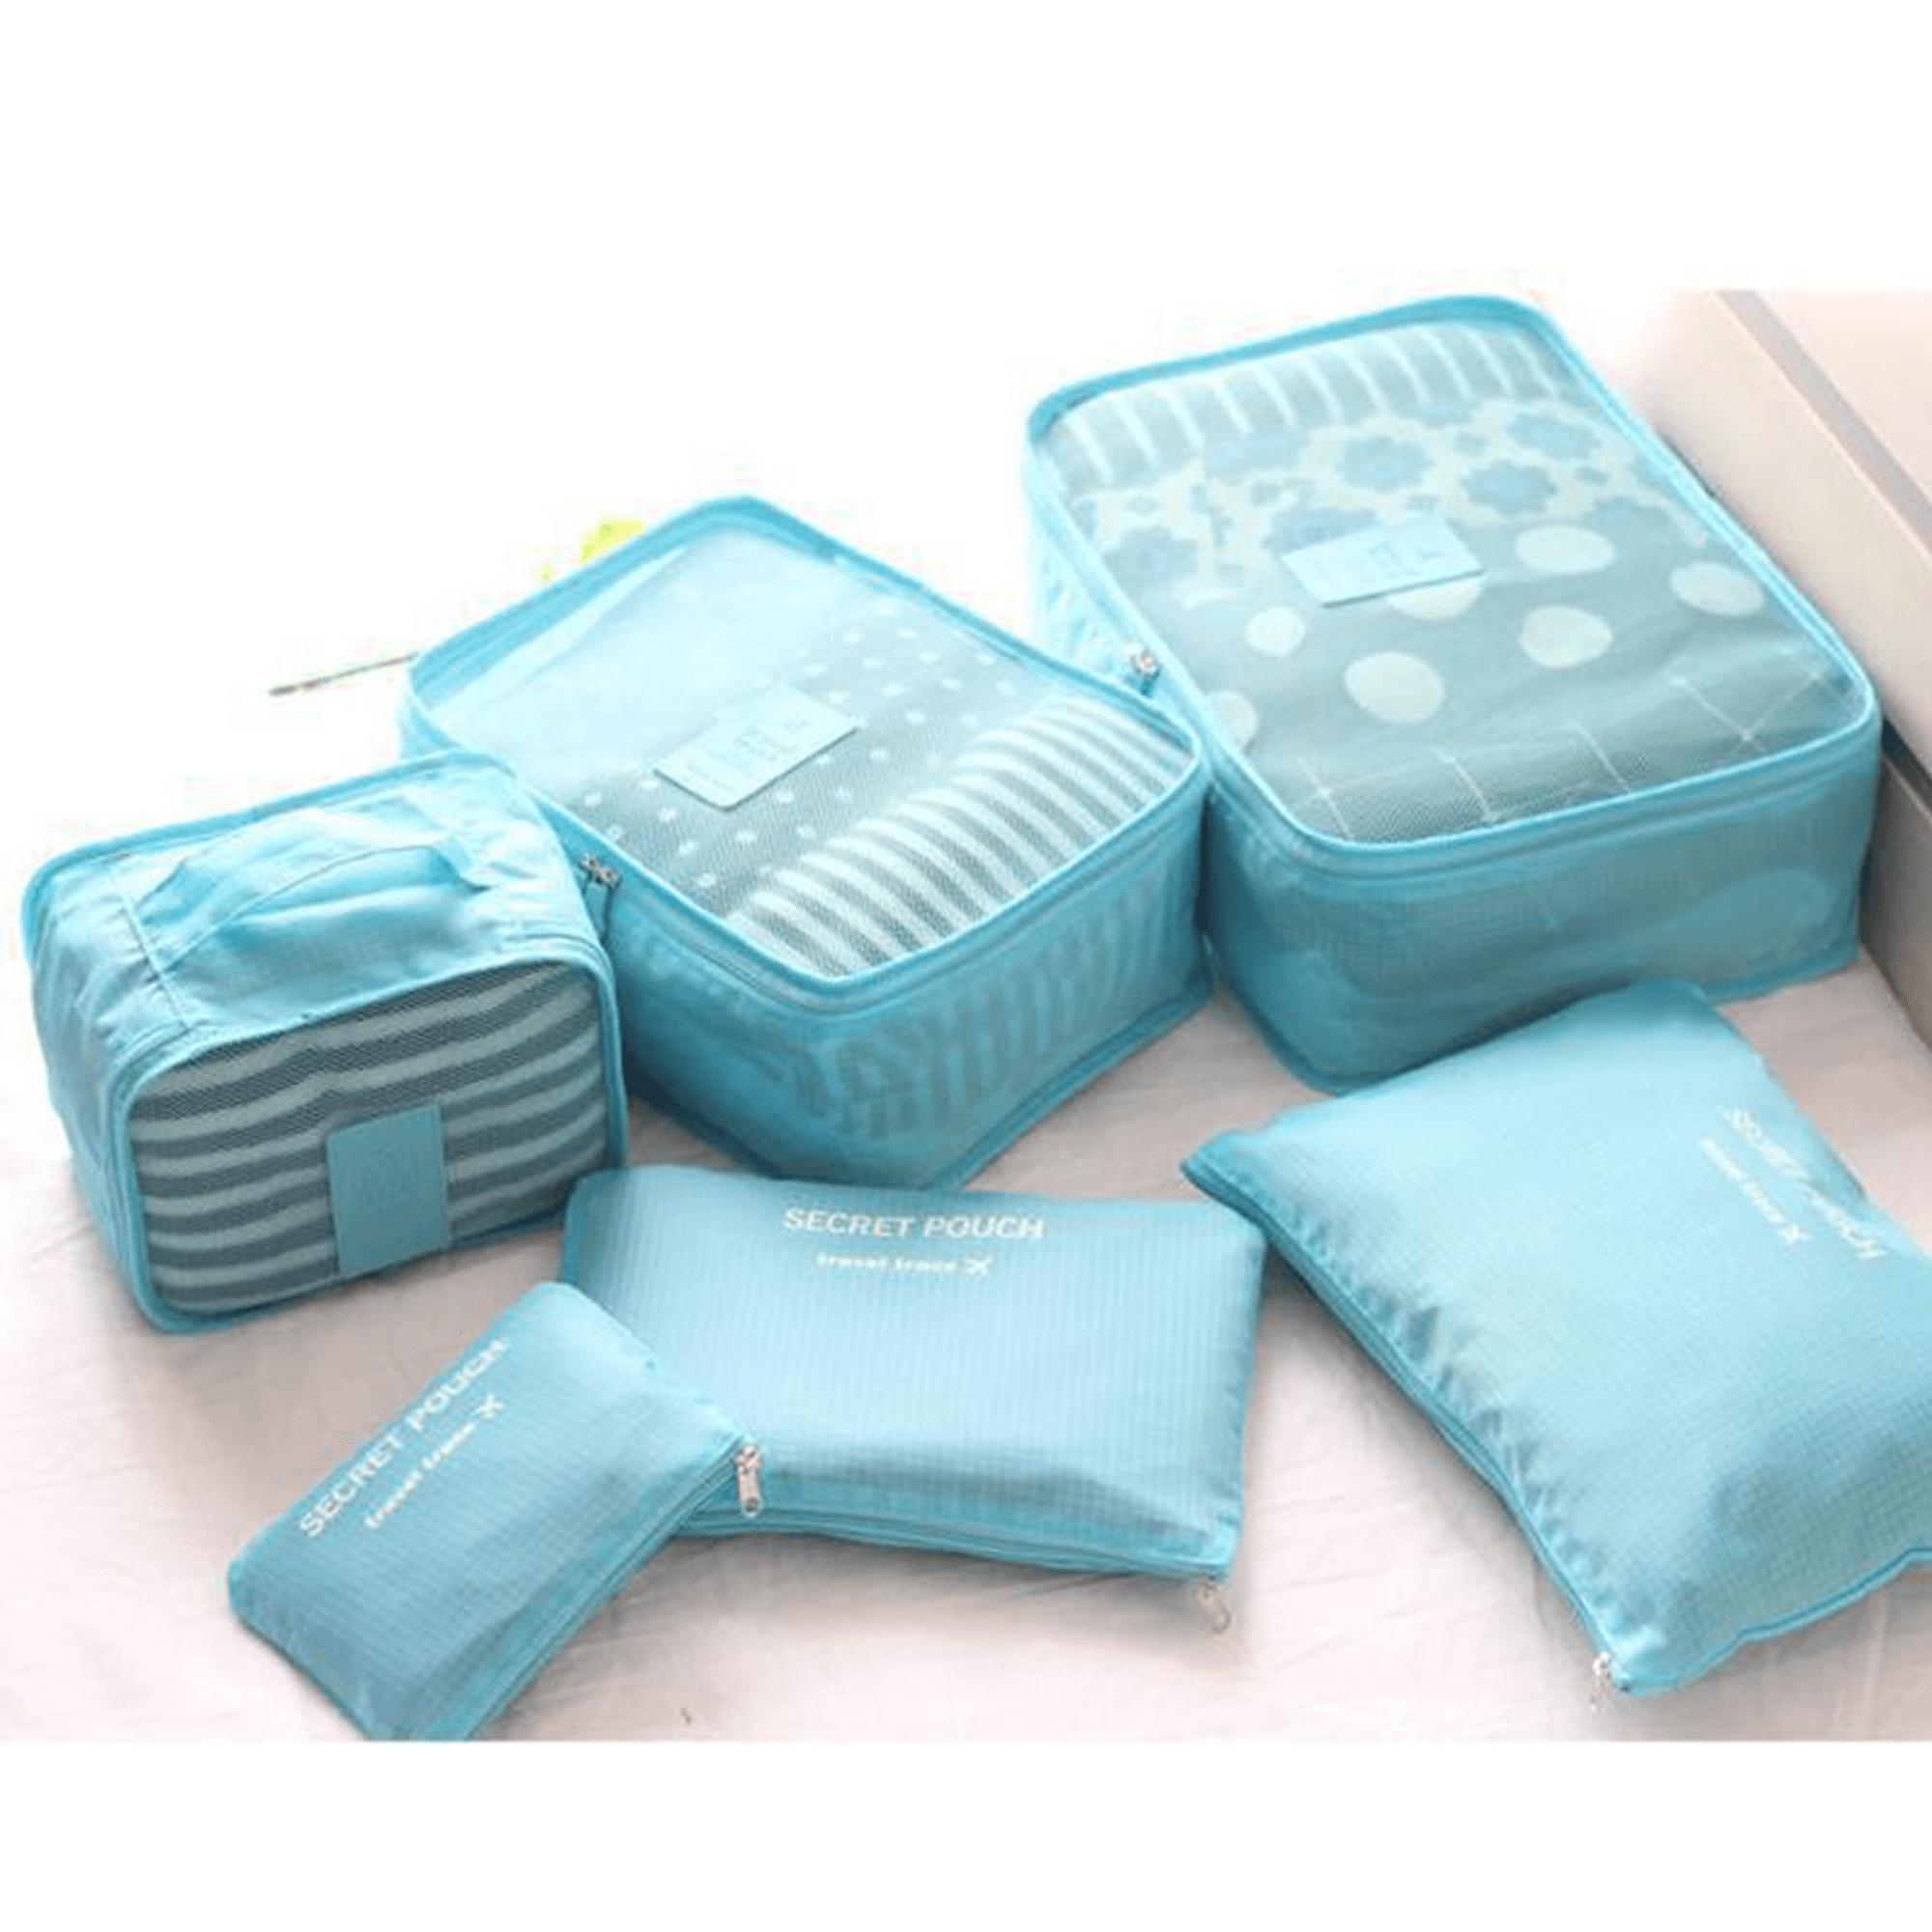 Hot Sale Travel Suitcase Storage Bags Travel Luggage Packing Organizers  Packing Cubes Set With Clothes Bag From Oopp, $15.71